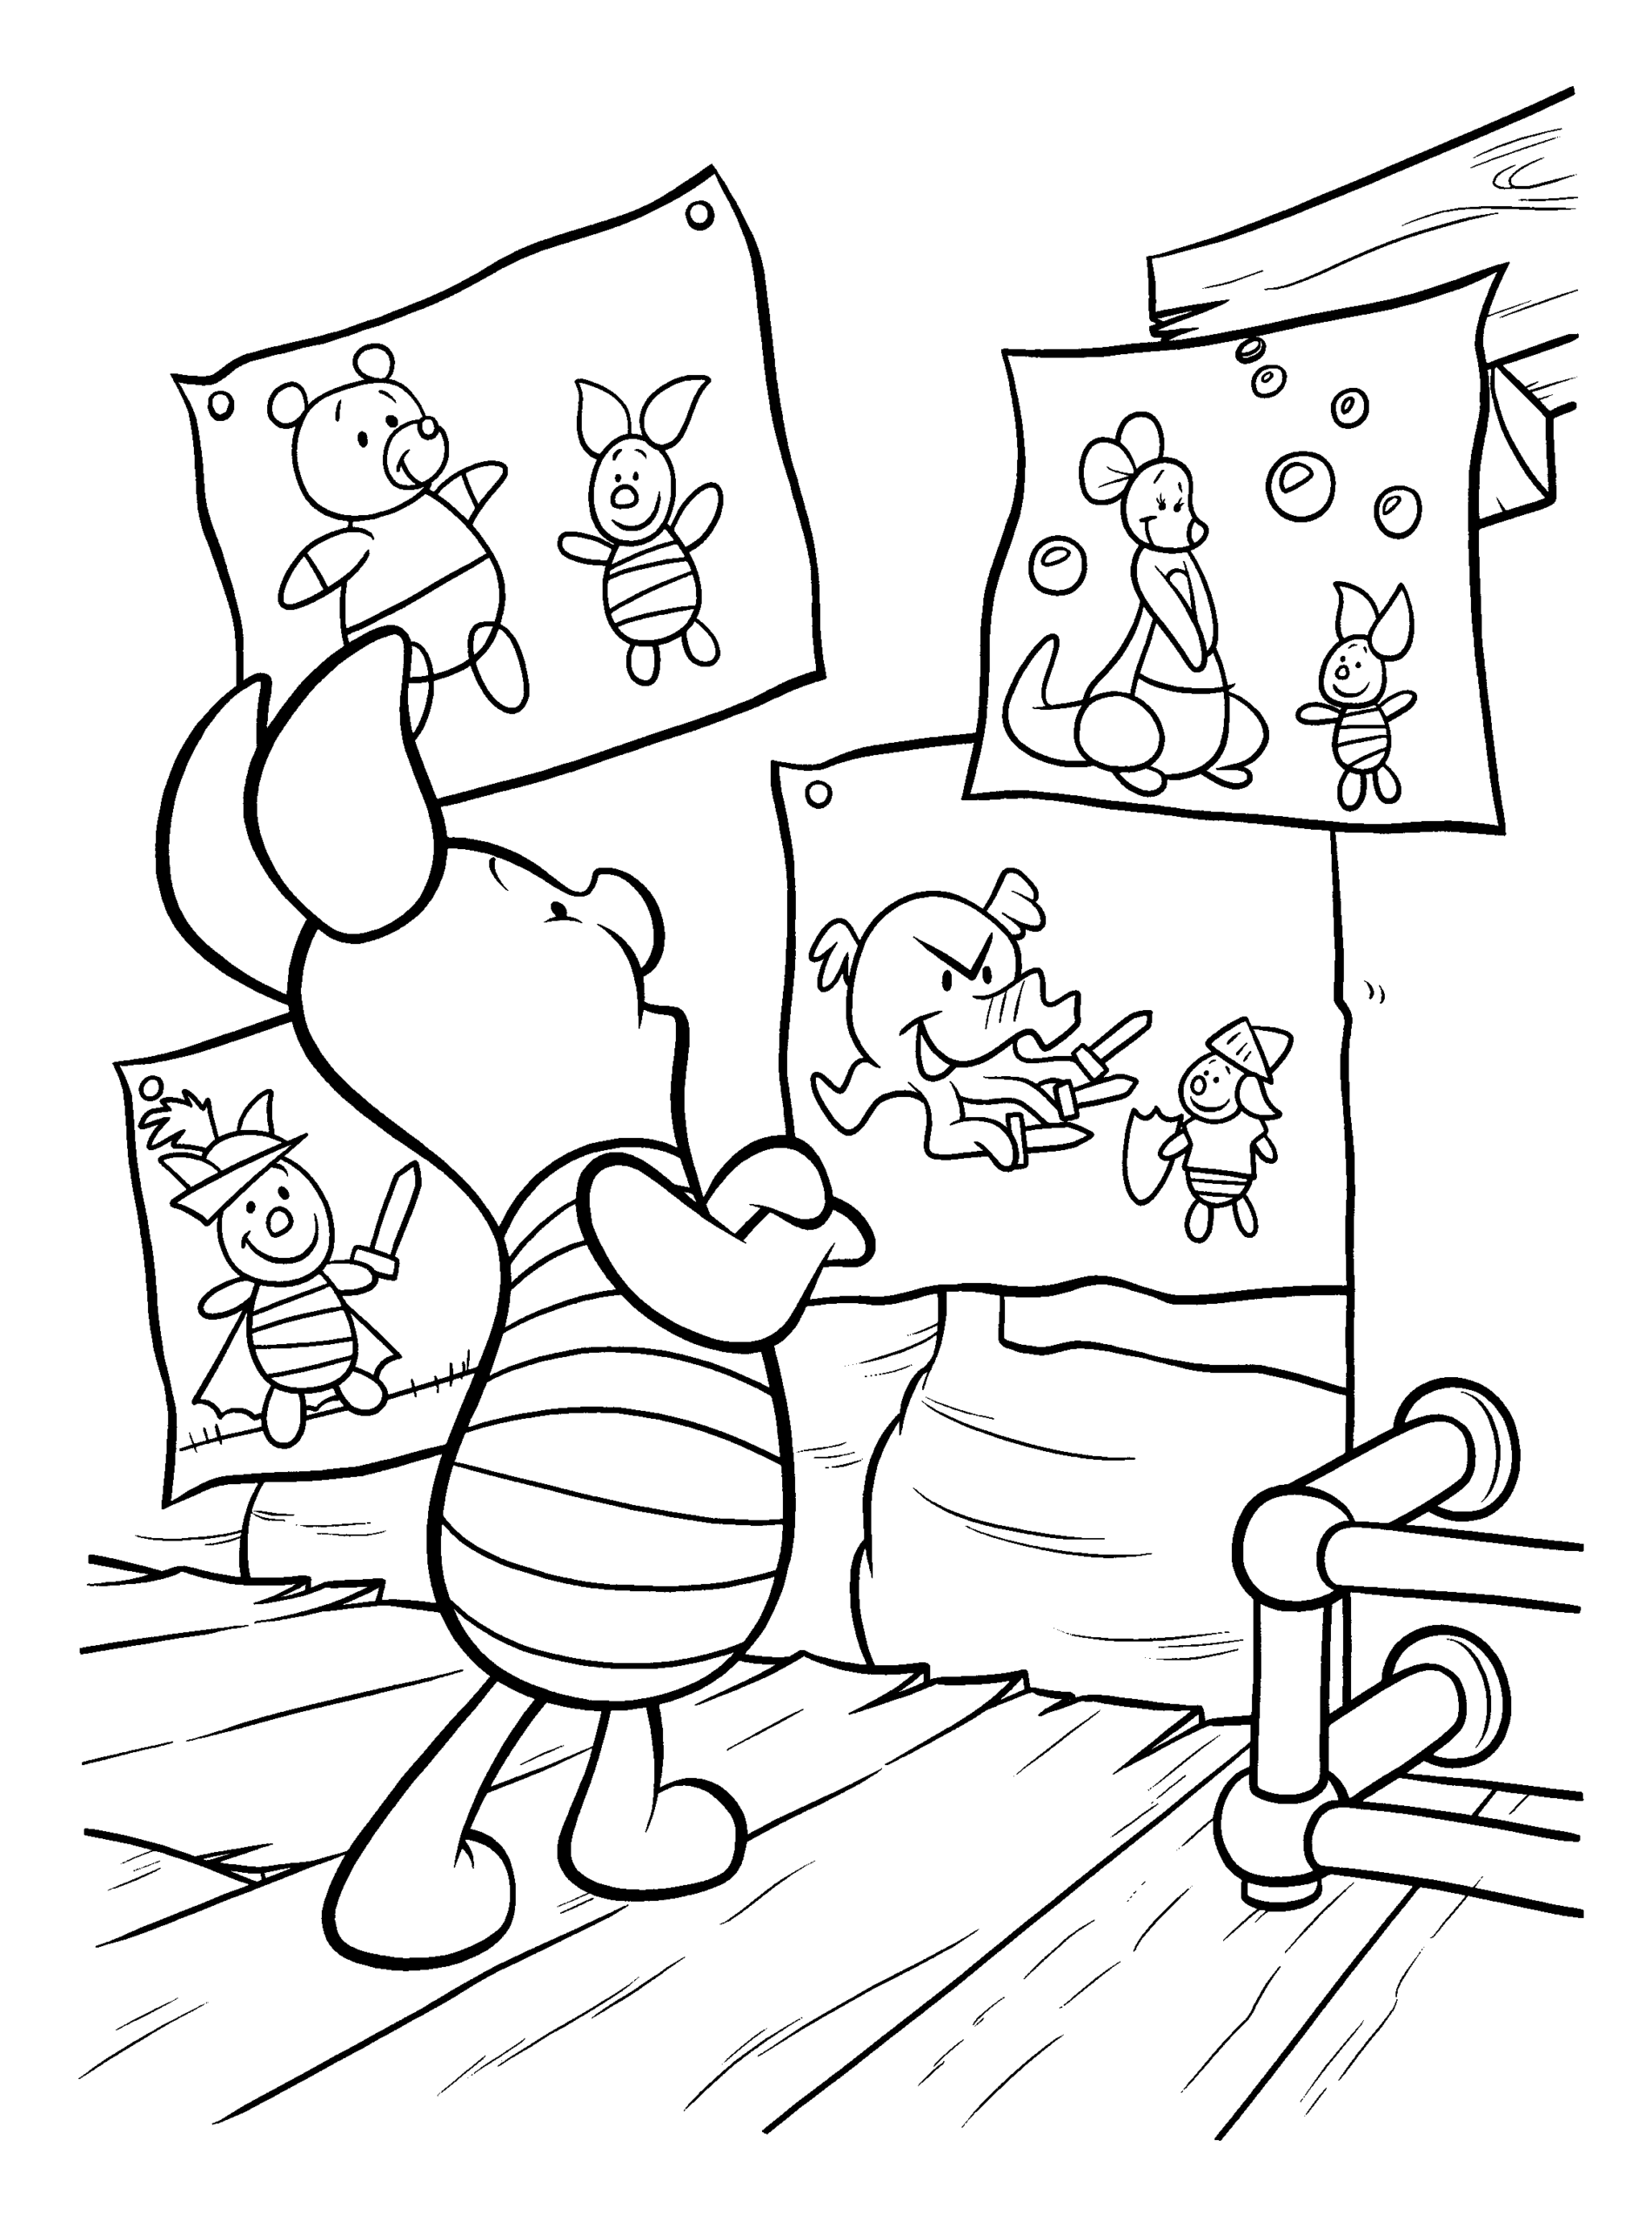 Winnie the Pooh Coloring Pages Cartoons winnie the pooh 3 Printable 2020 7133 Coloring4free